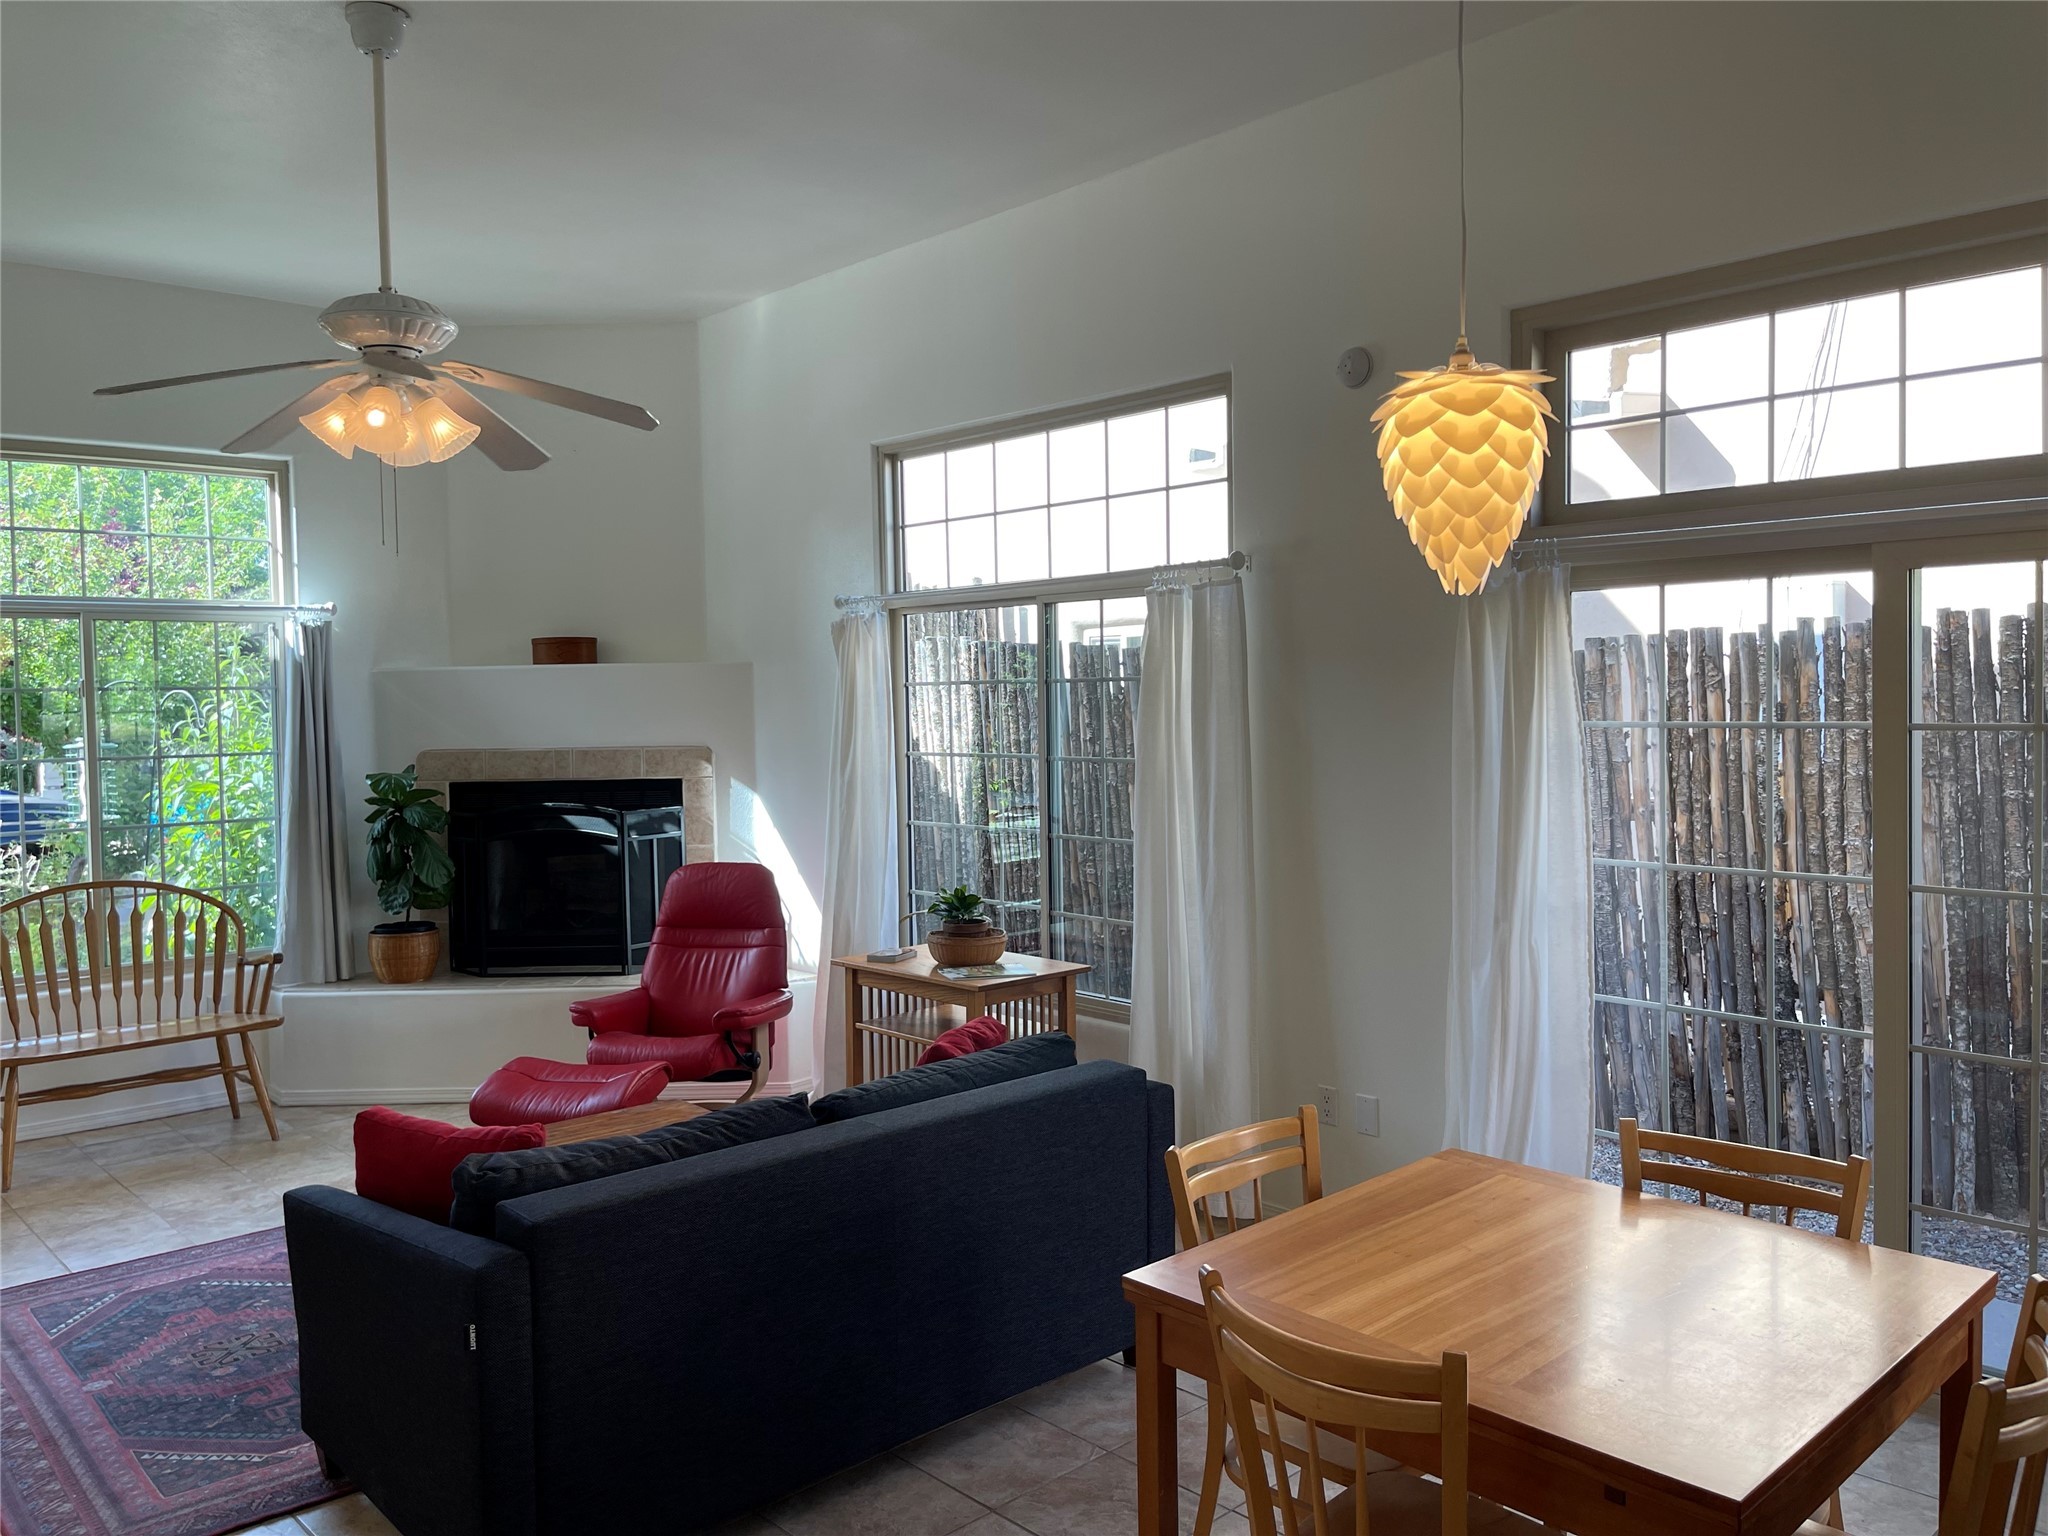 Warm lighting and ceiling fan, adds comfort